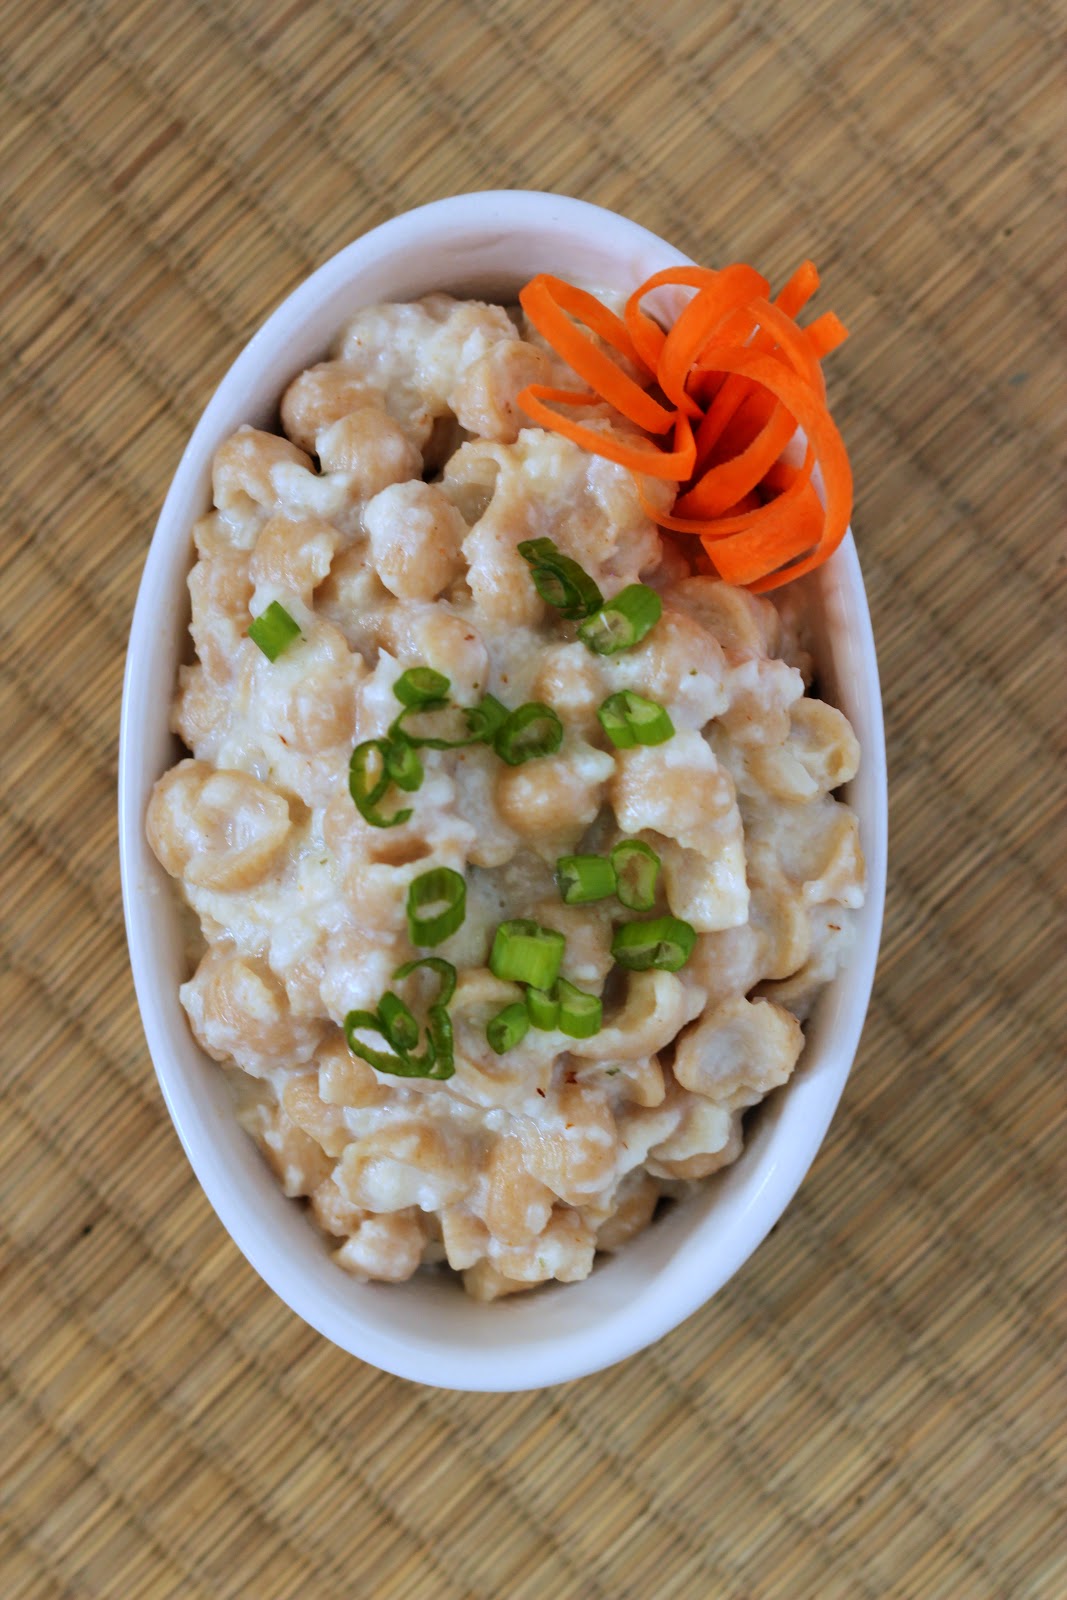 Enjoy this mac and cheese recipe with your family this Lent. It is full of fiber and veggies!